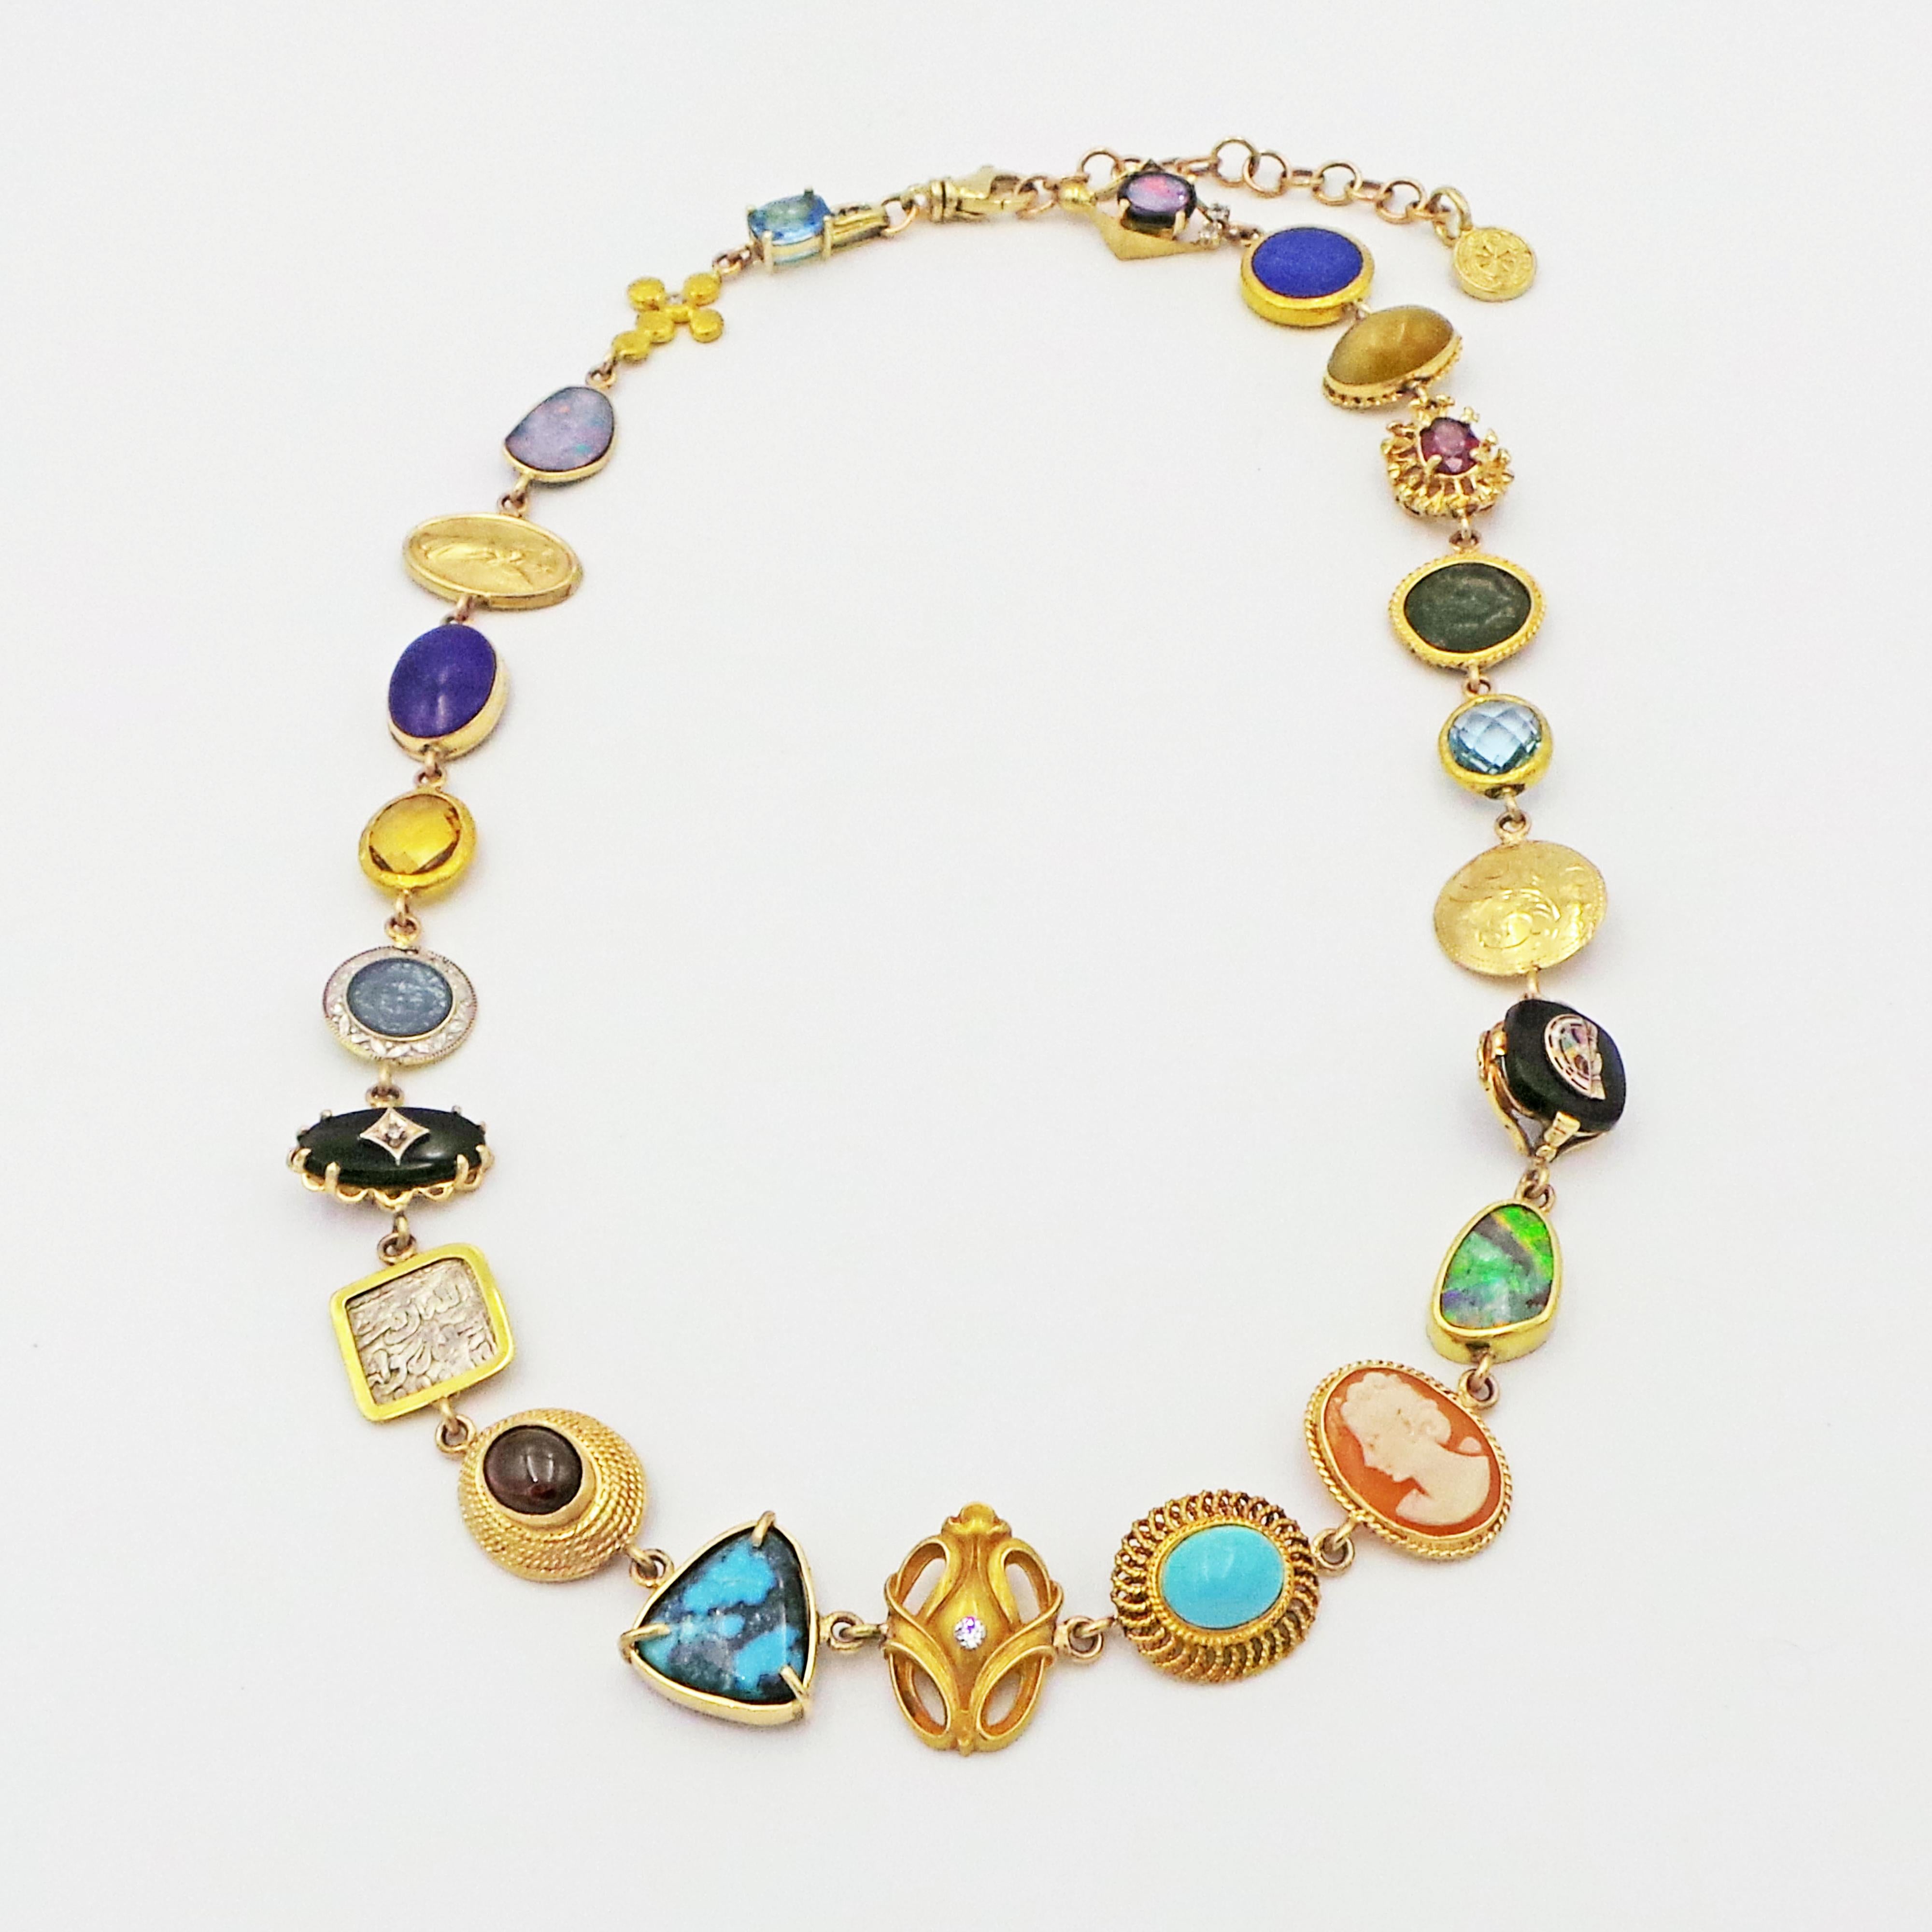 One-of-a-kind, Bohemian necklace features multiple gemstones, vintage jewelry pieces and ancient coins set in 14k yellow gold. Amazing 23 pieces include: blue Topaz, Australian Opal, Diamonds, Lapis Lazuli, Citrine, Onyx, Garnet, Turquoise, Cat's